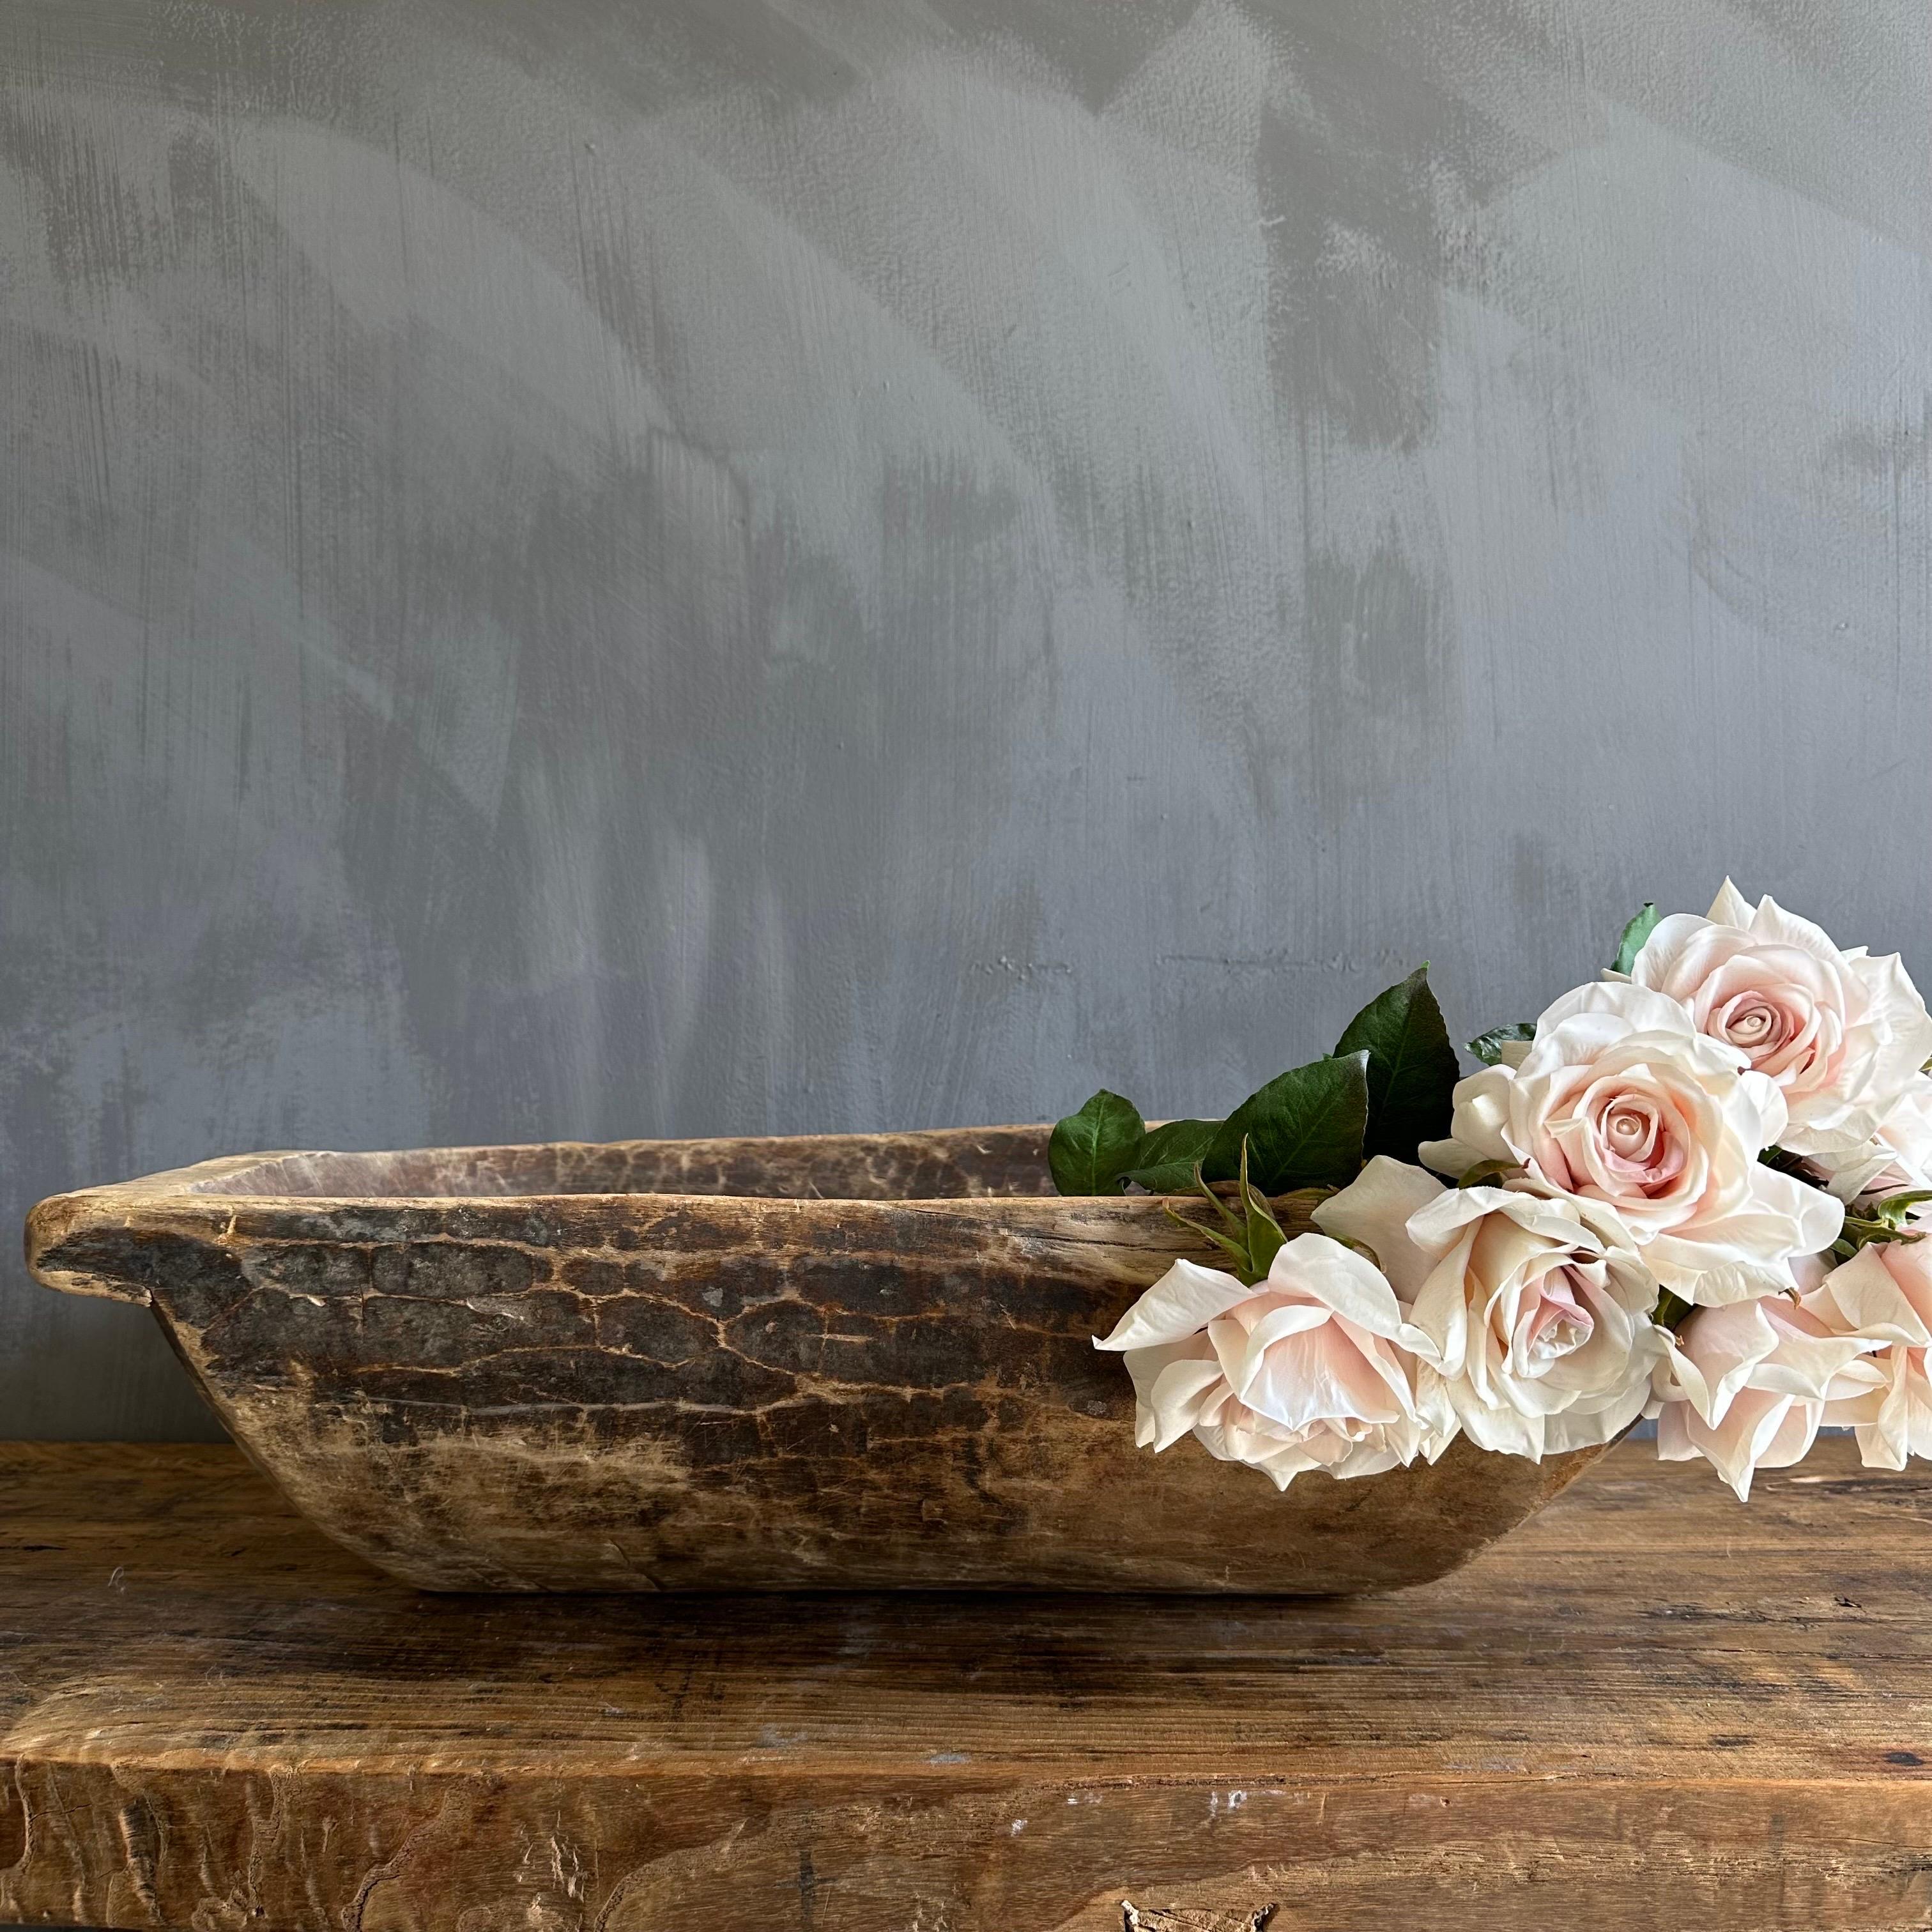 Vintage wood trough decorative bowl
 Beautiful wood trough with natural patina. Can be used on a dining table or server for decoration.
Wood is natural with patina. Some troughs will have decorative metal on or around the bowl, please view the